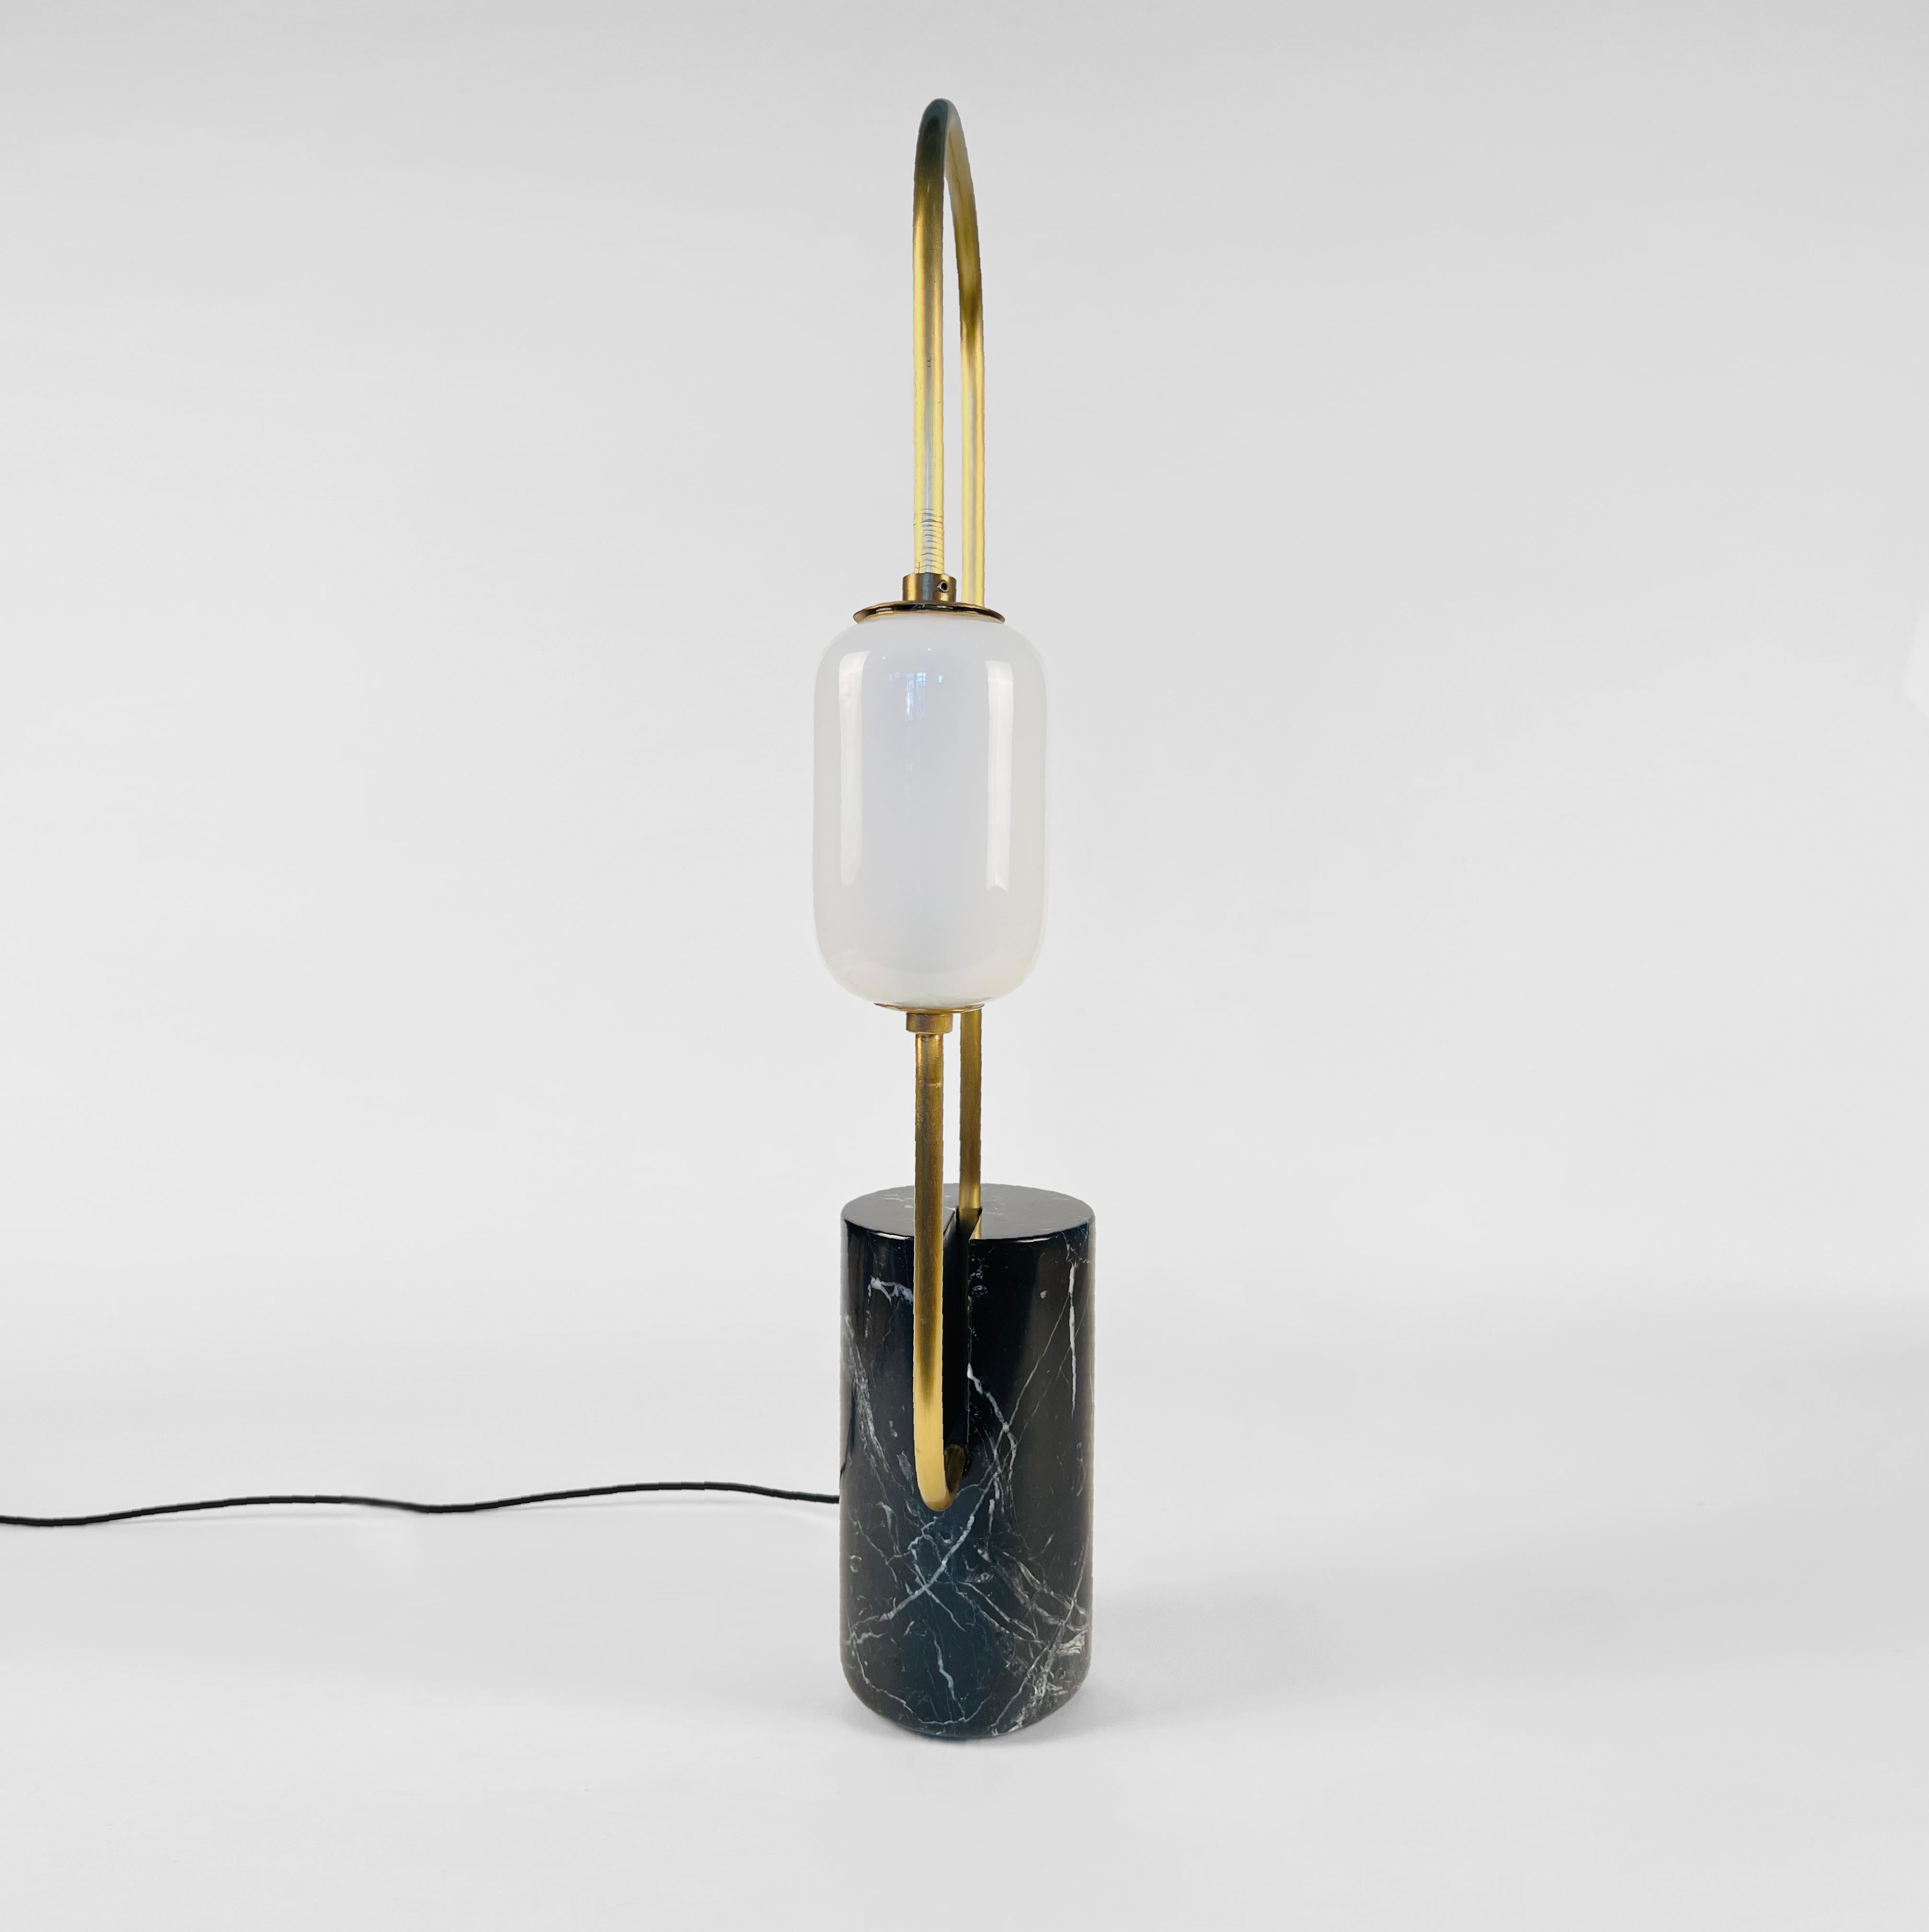 Loop table lamp. Made in black marble and brass lacquered metal pipe that loops around the base and holds a milky white glass capsule shade with a LED lamp.